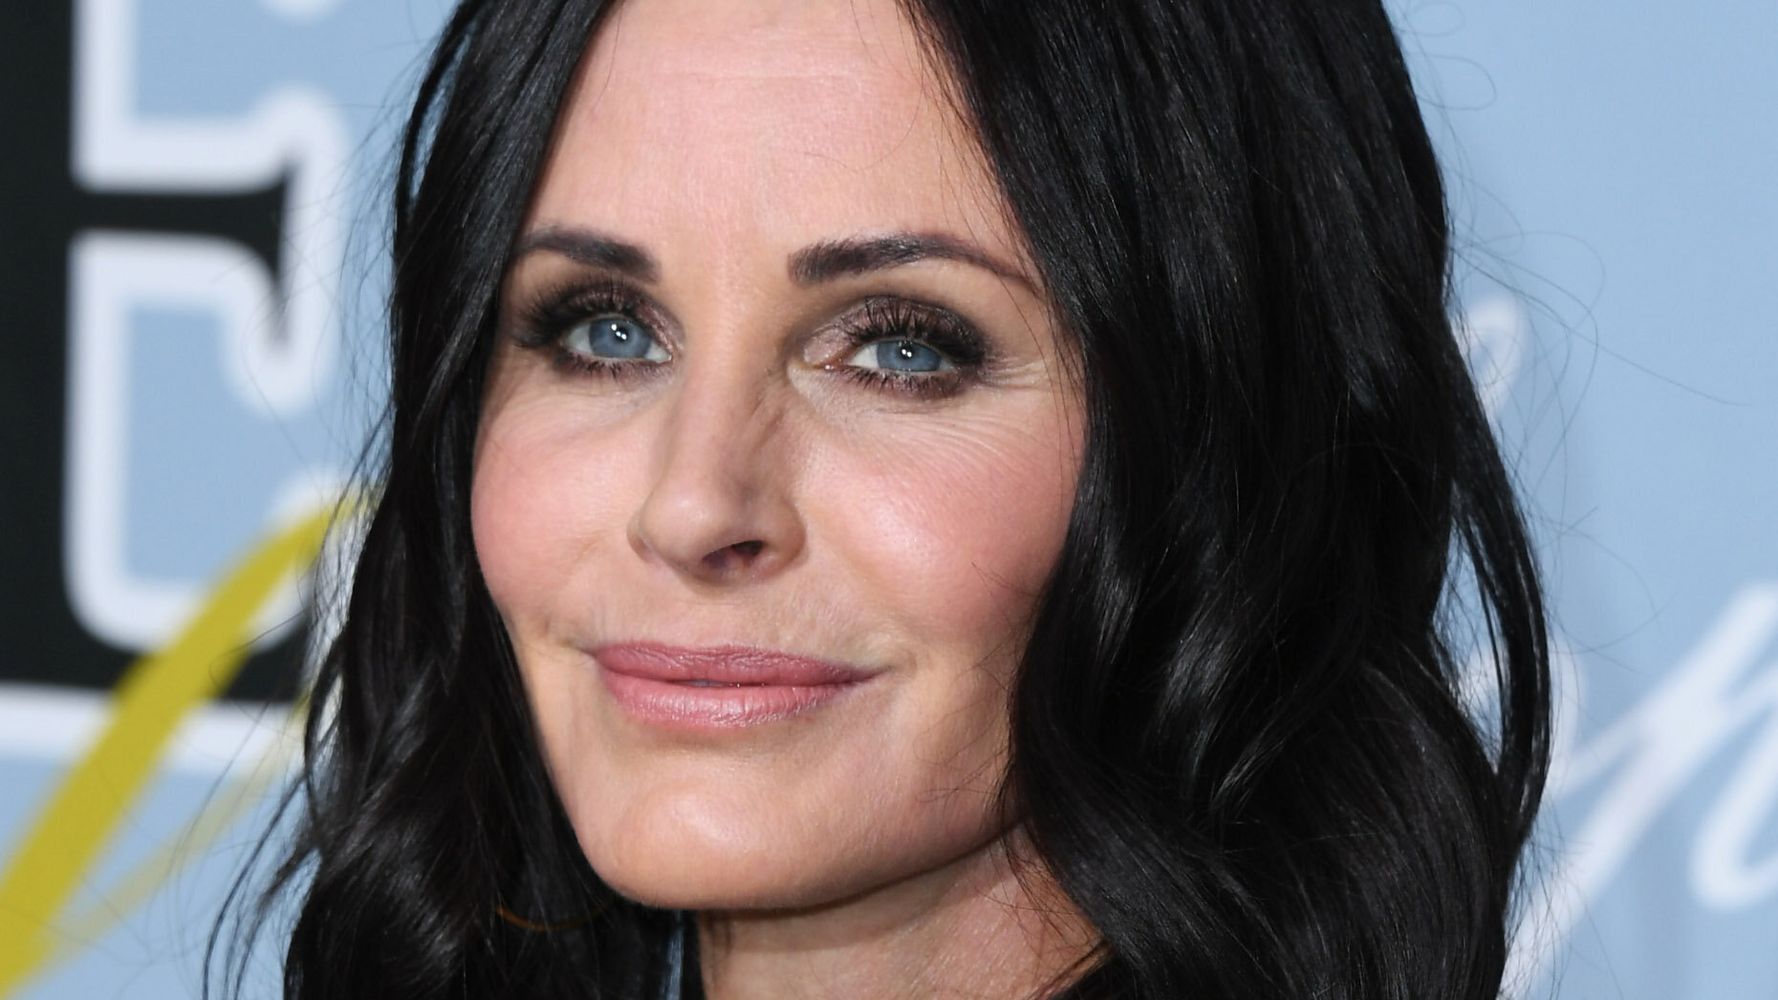 Courteney Cox, The Sole 'Friend' Snubbed By Emmys, Finally Nabs Nom For Reunion